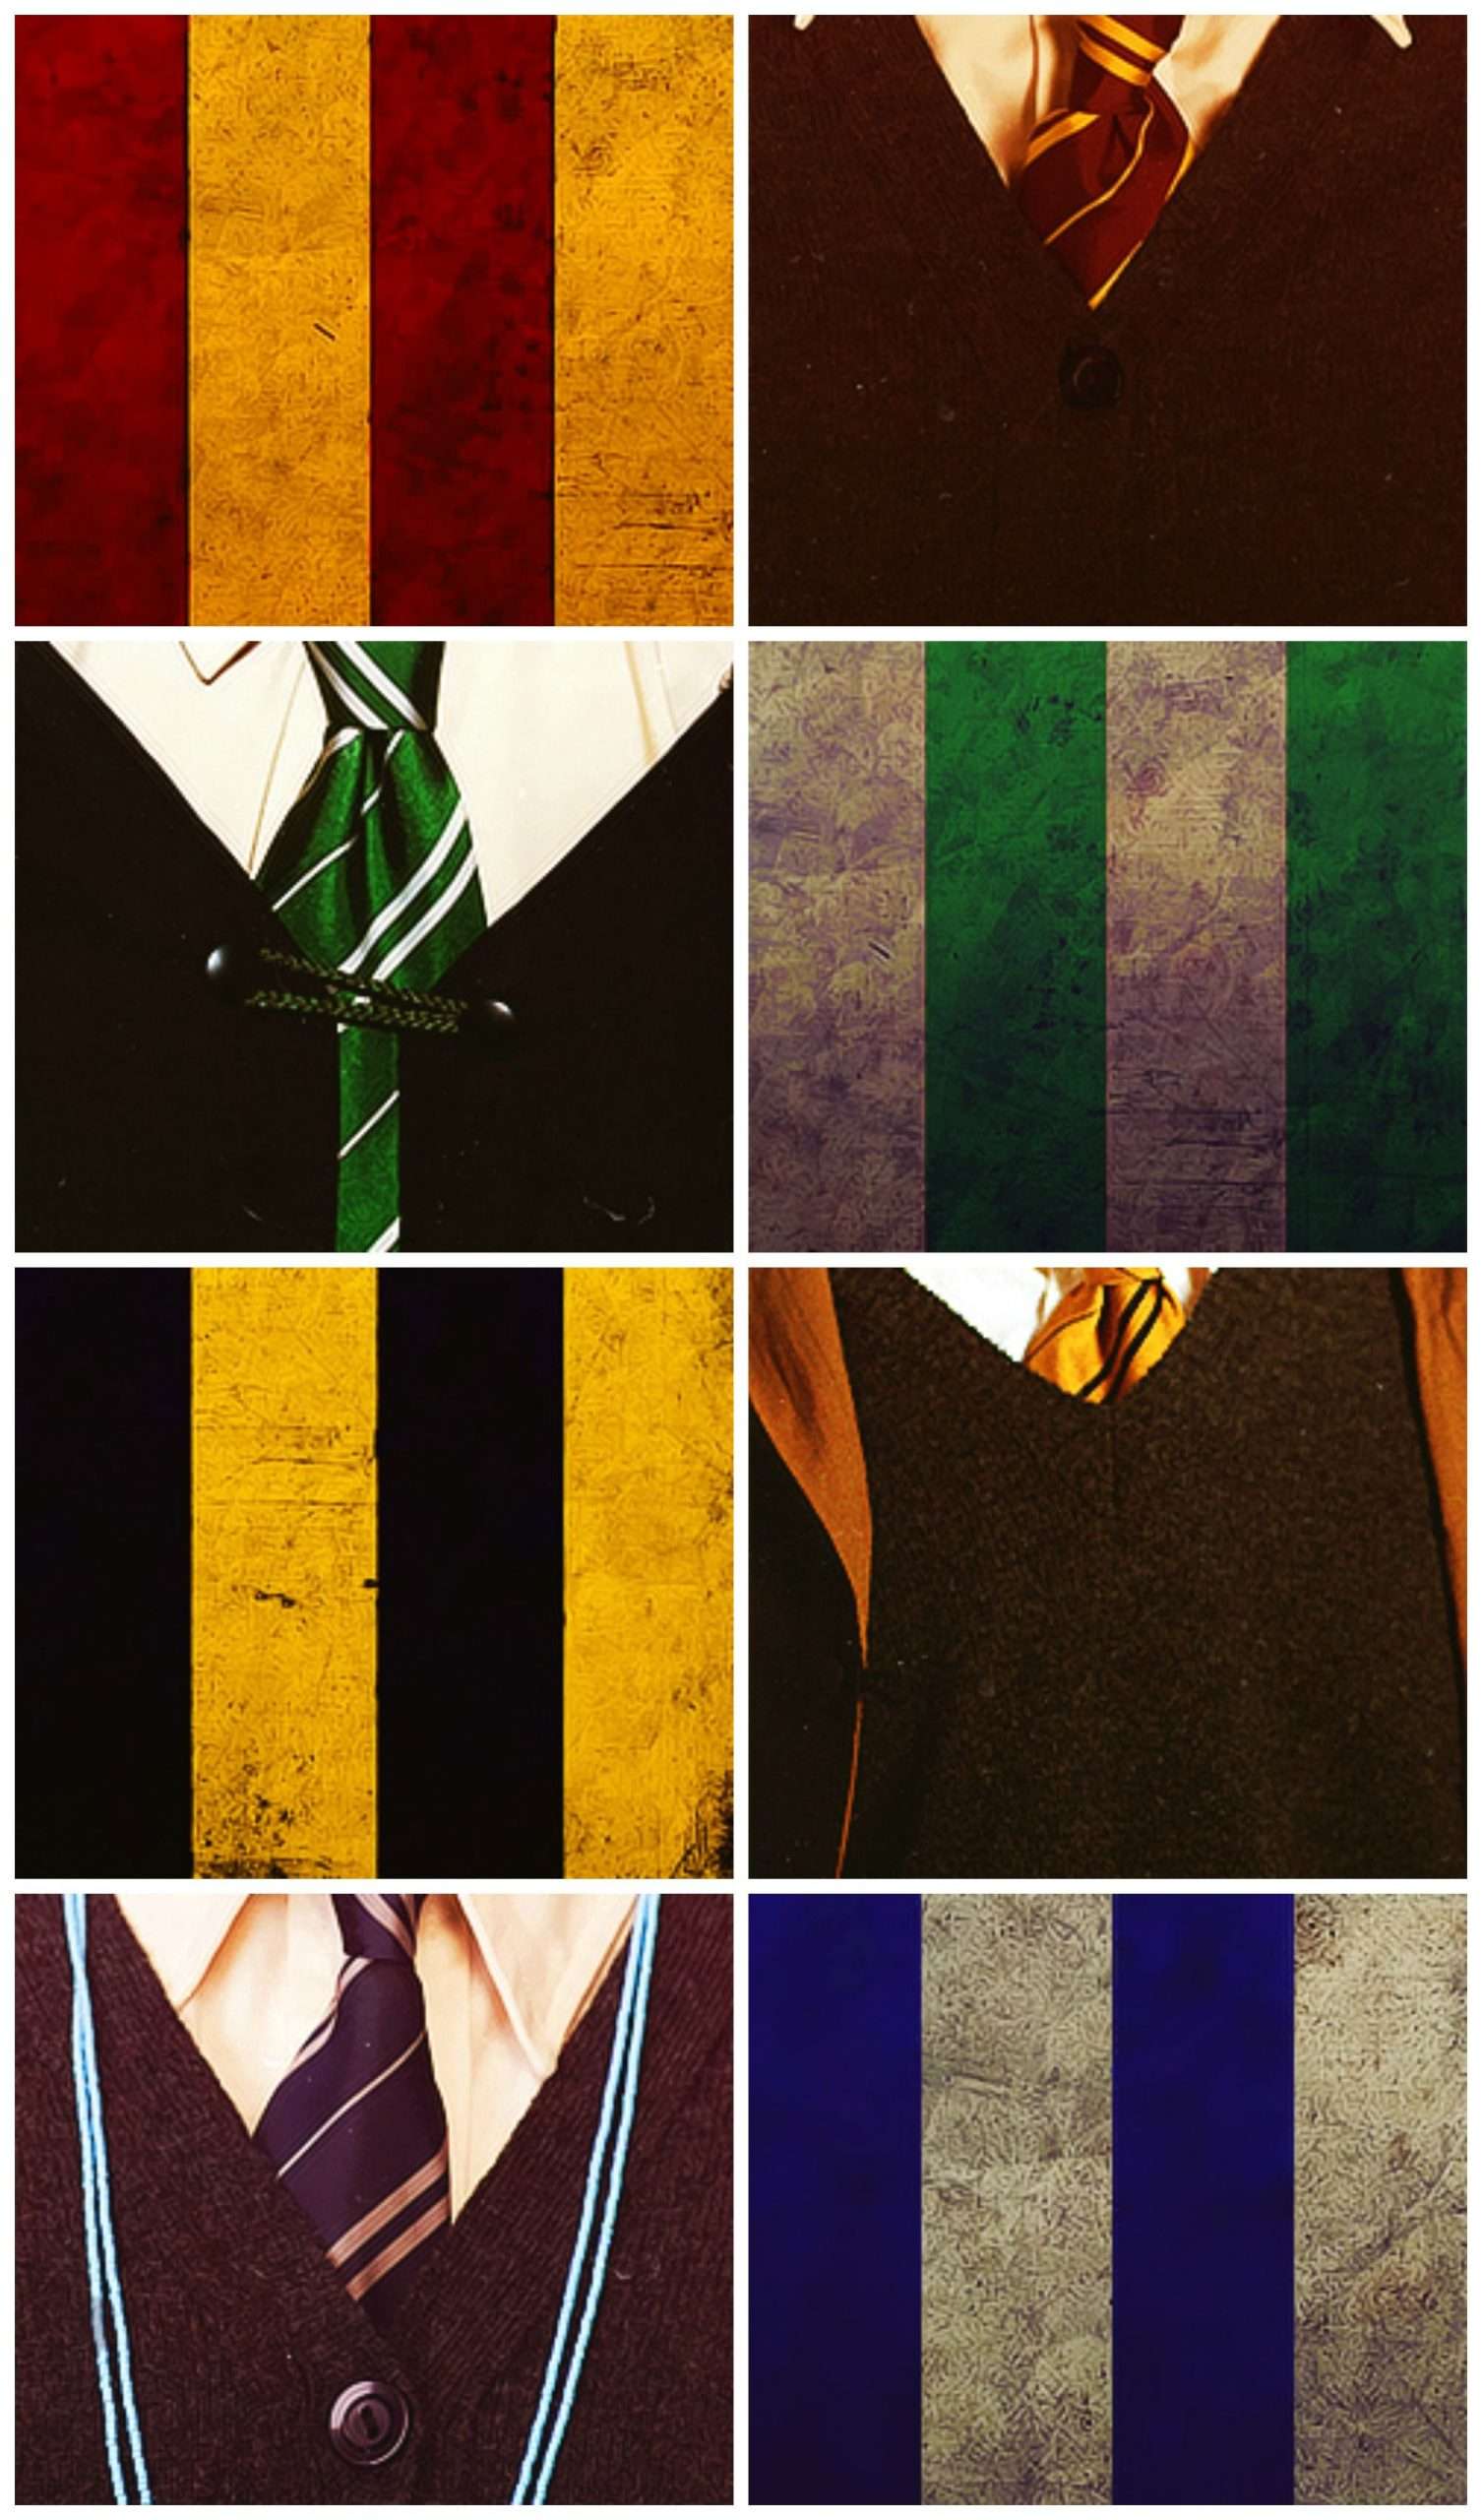 This is cool except for messing up Ravenclaw colors